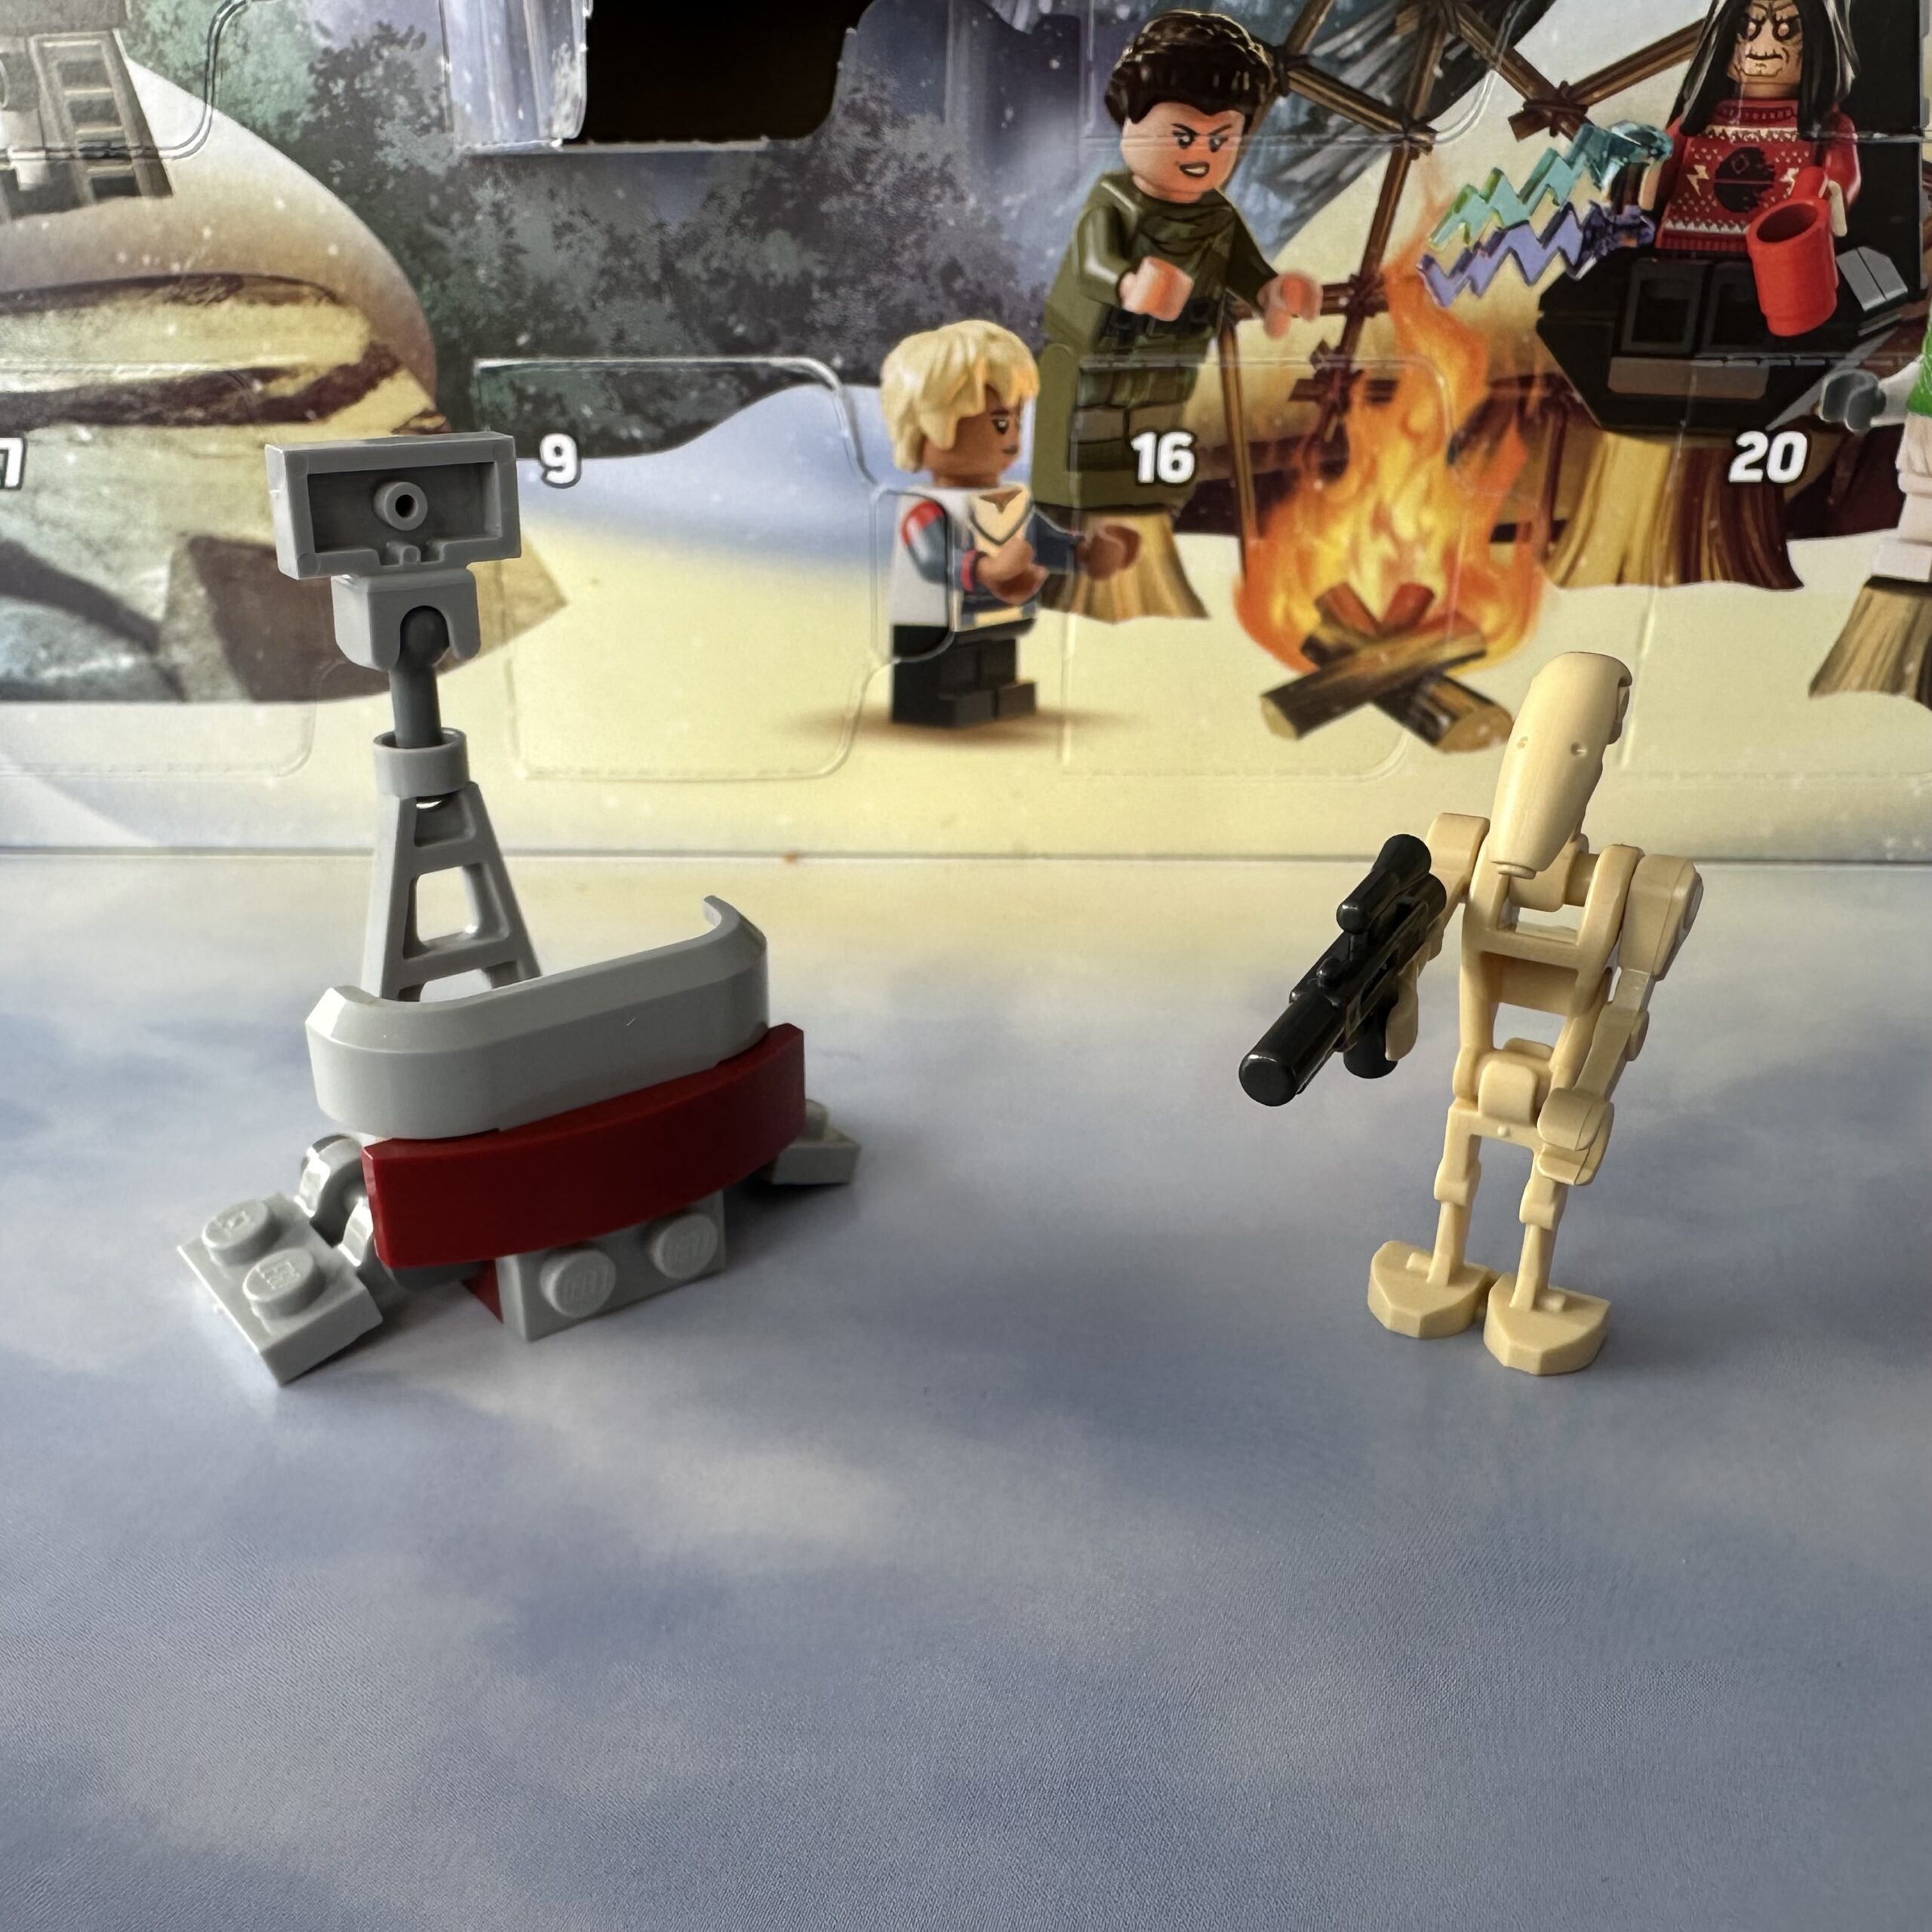 Two LEGO micro-builds. A nondescript amalgamation of mostly gray bricks on the left and a battle droid minifigure holding a blaster on the right